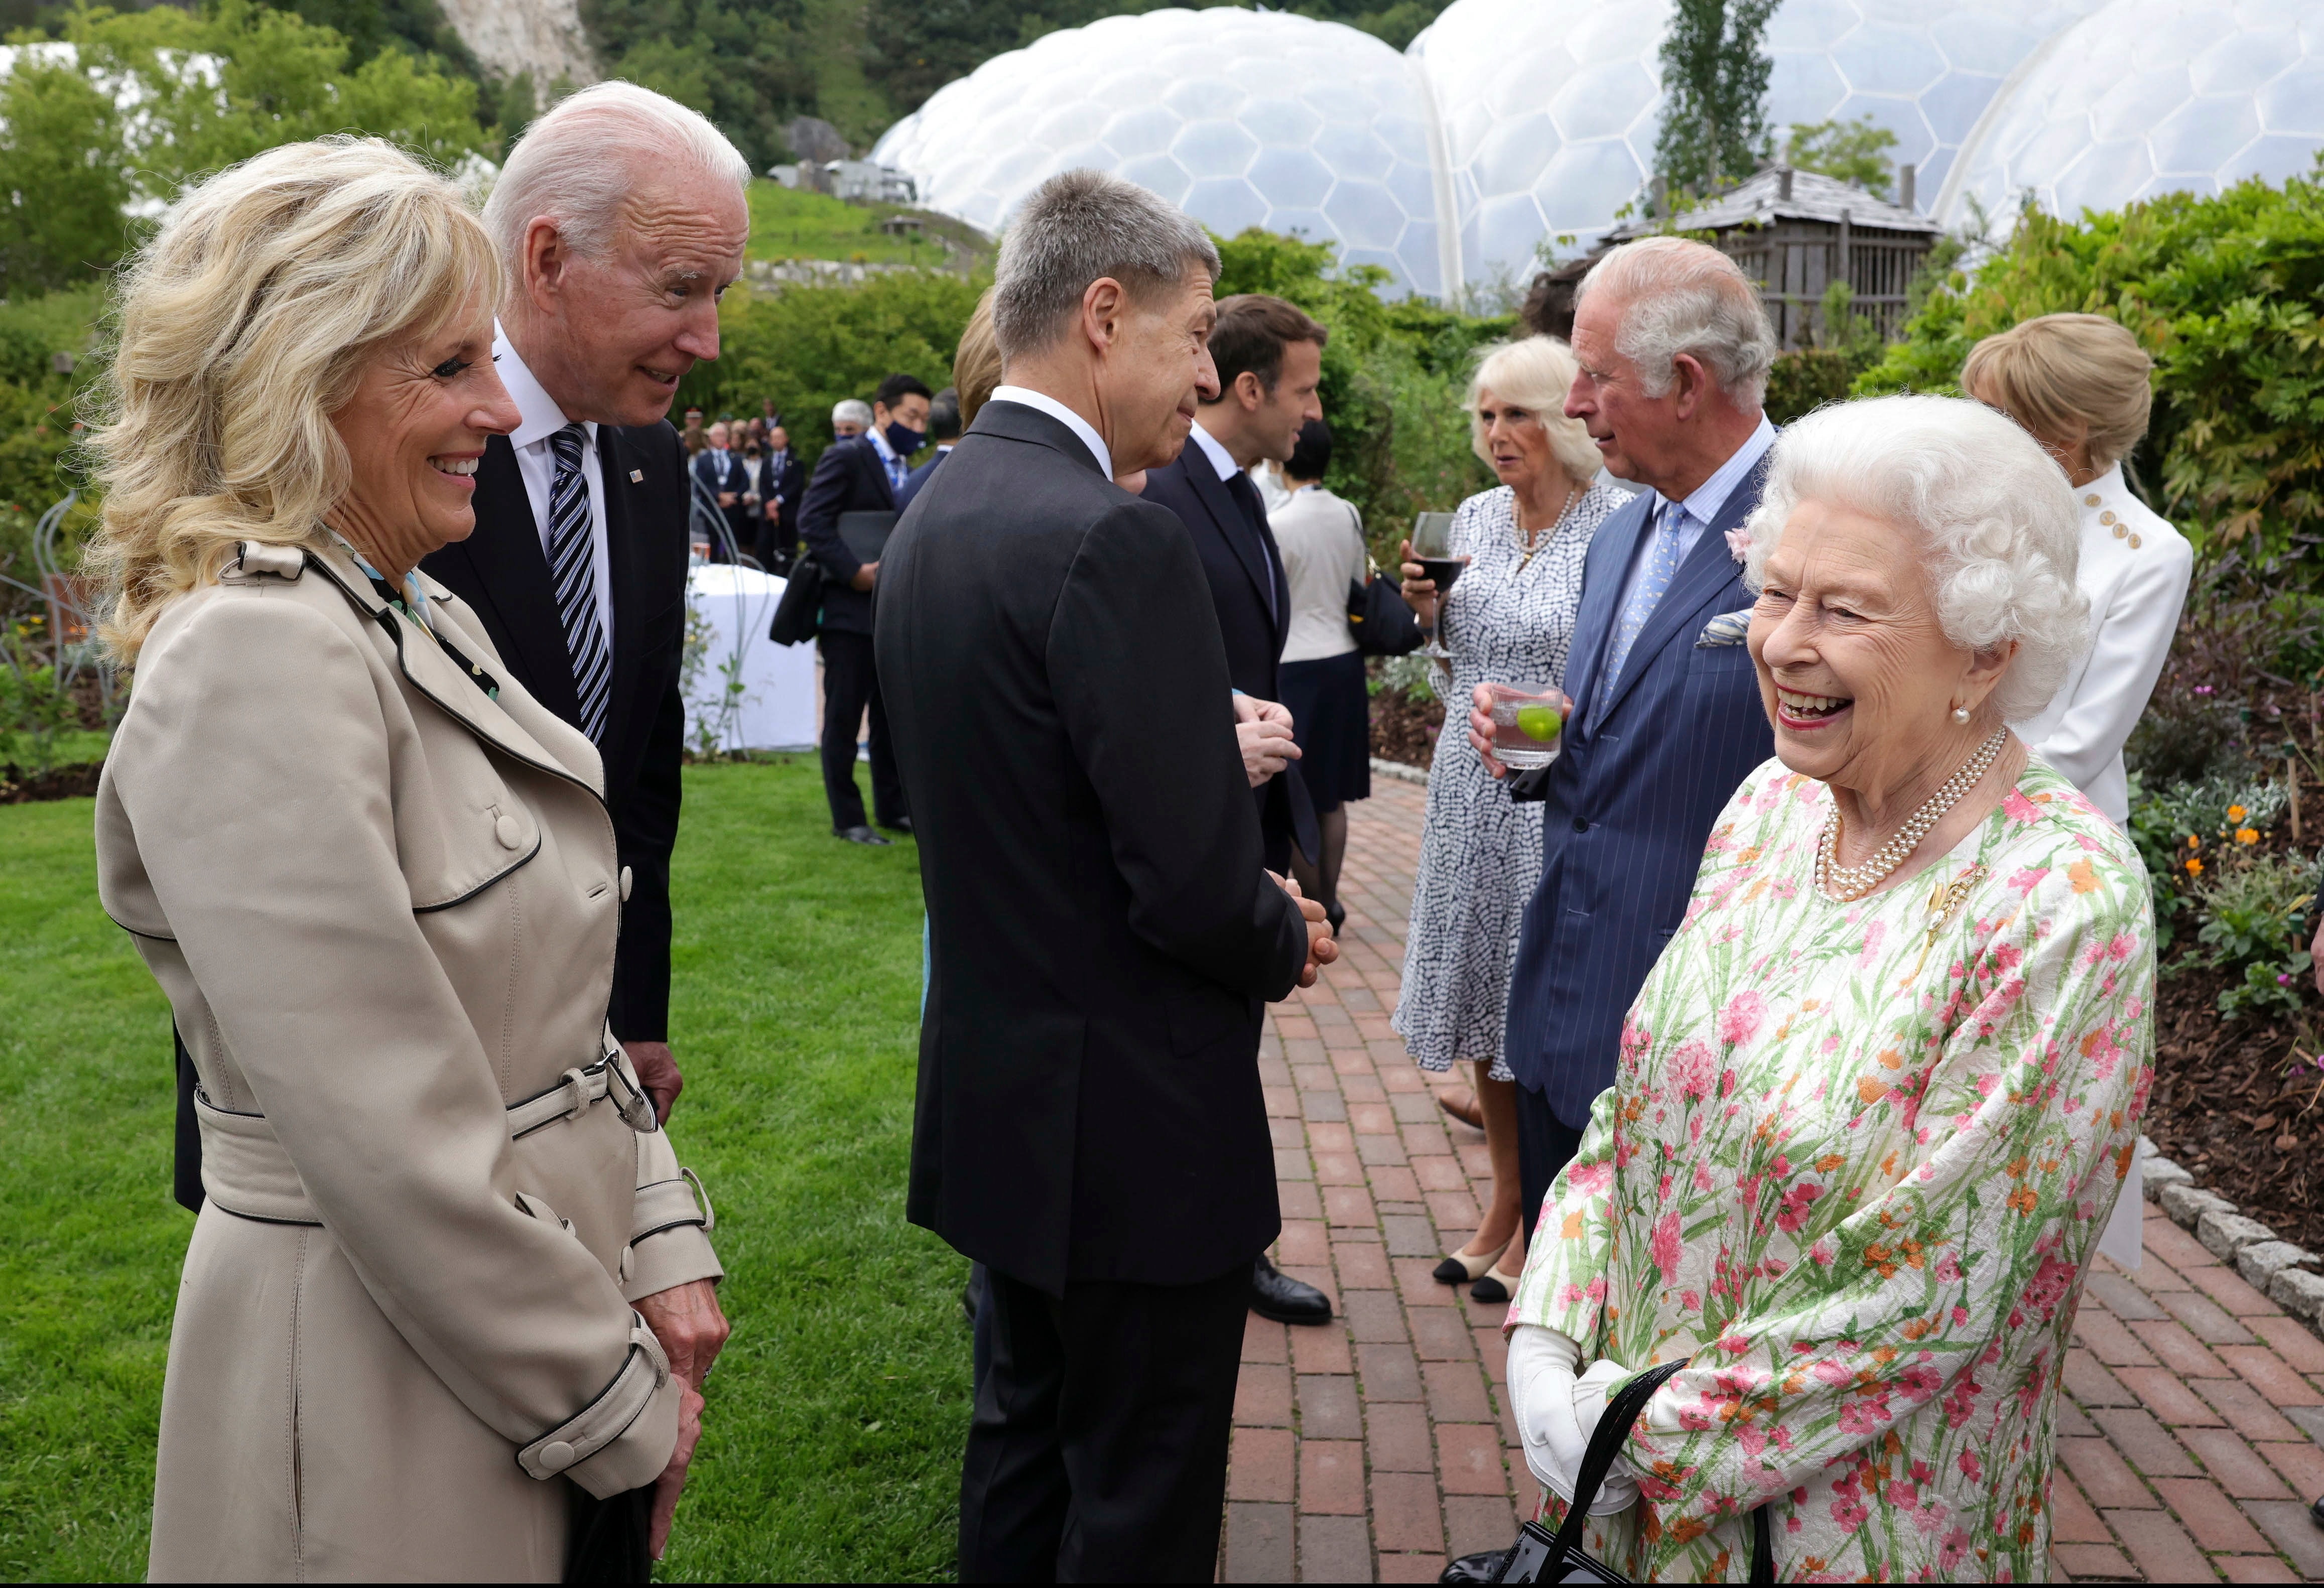 Queen Elizabeth shares a moment with US President Joe Biden and his wife Jill during a reception at the G7 summit in Cornwall, Britain, on 11 June.